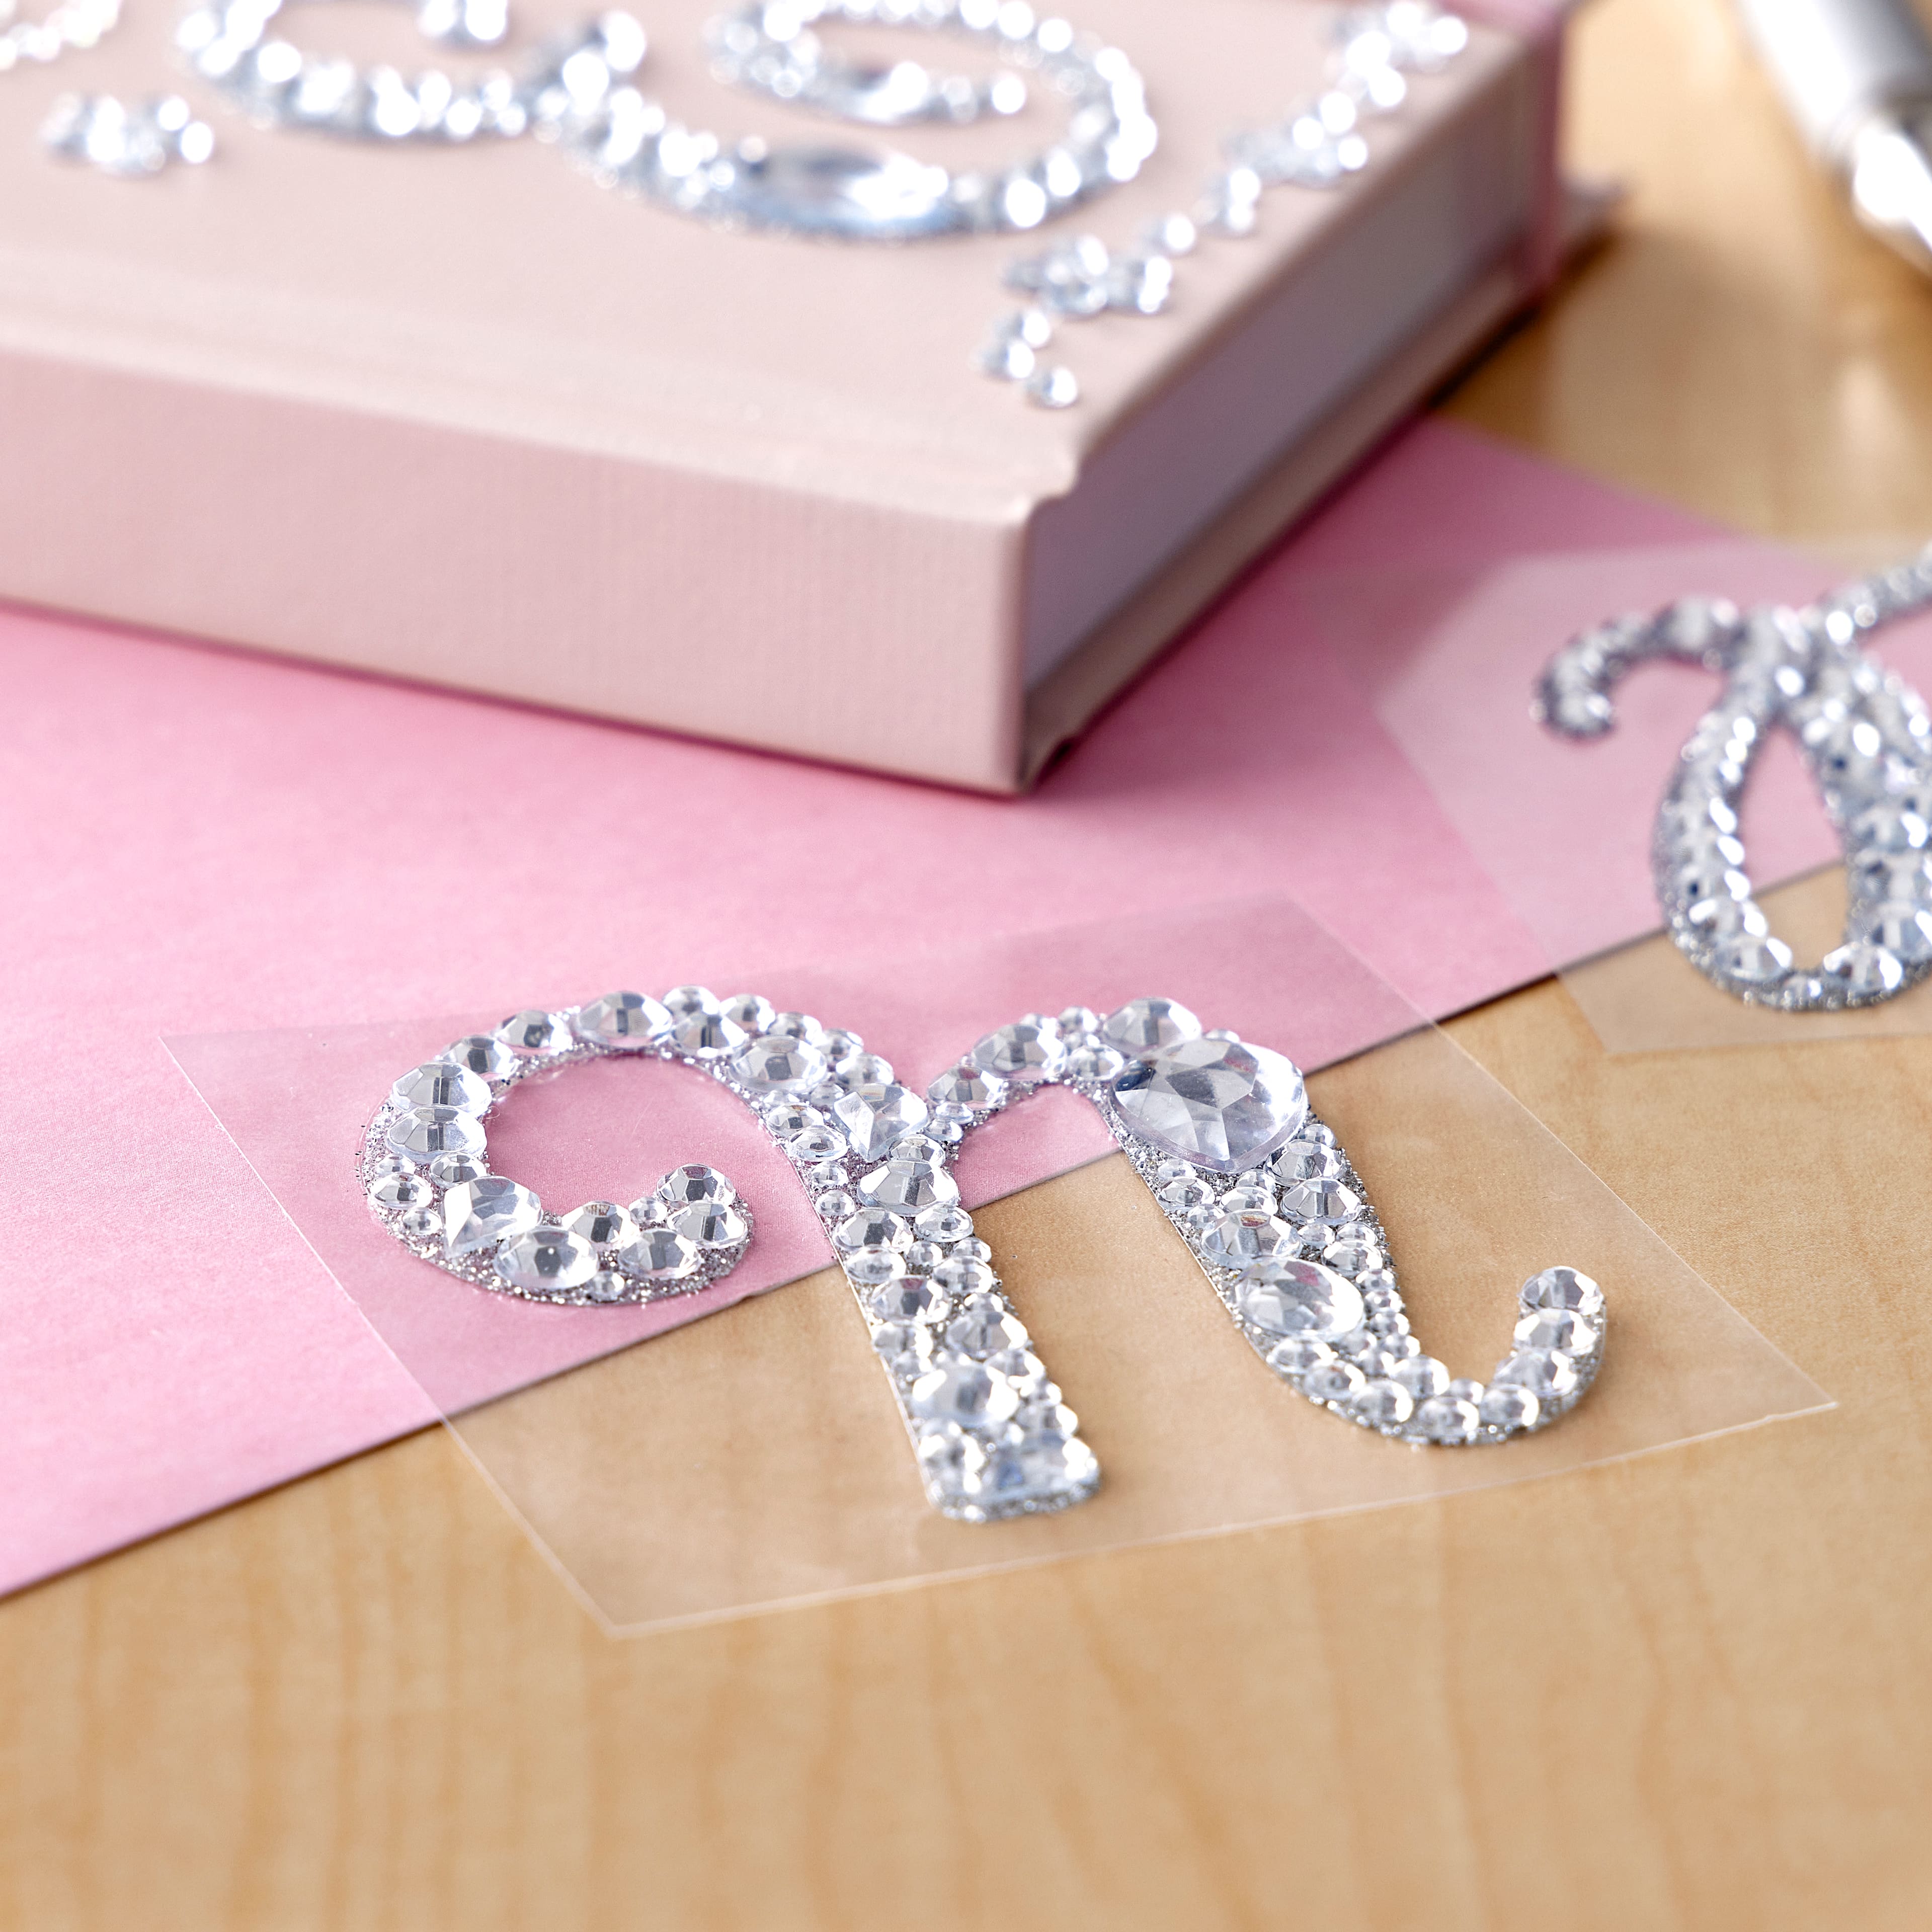 Bling Alphabet Letter Sticker by Recollections&#x2122;